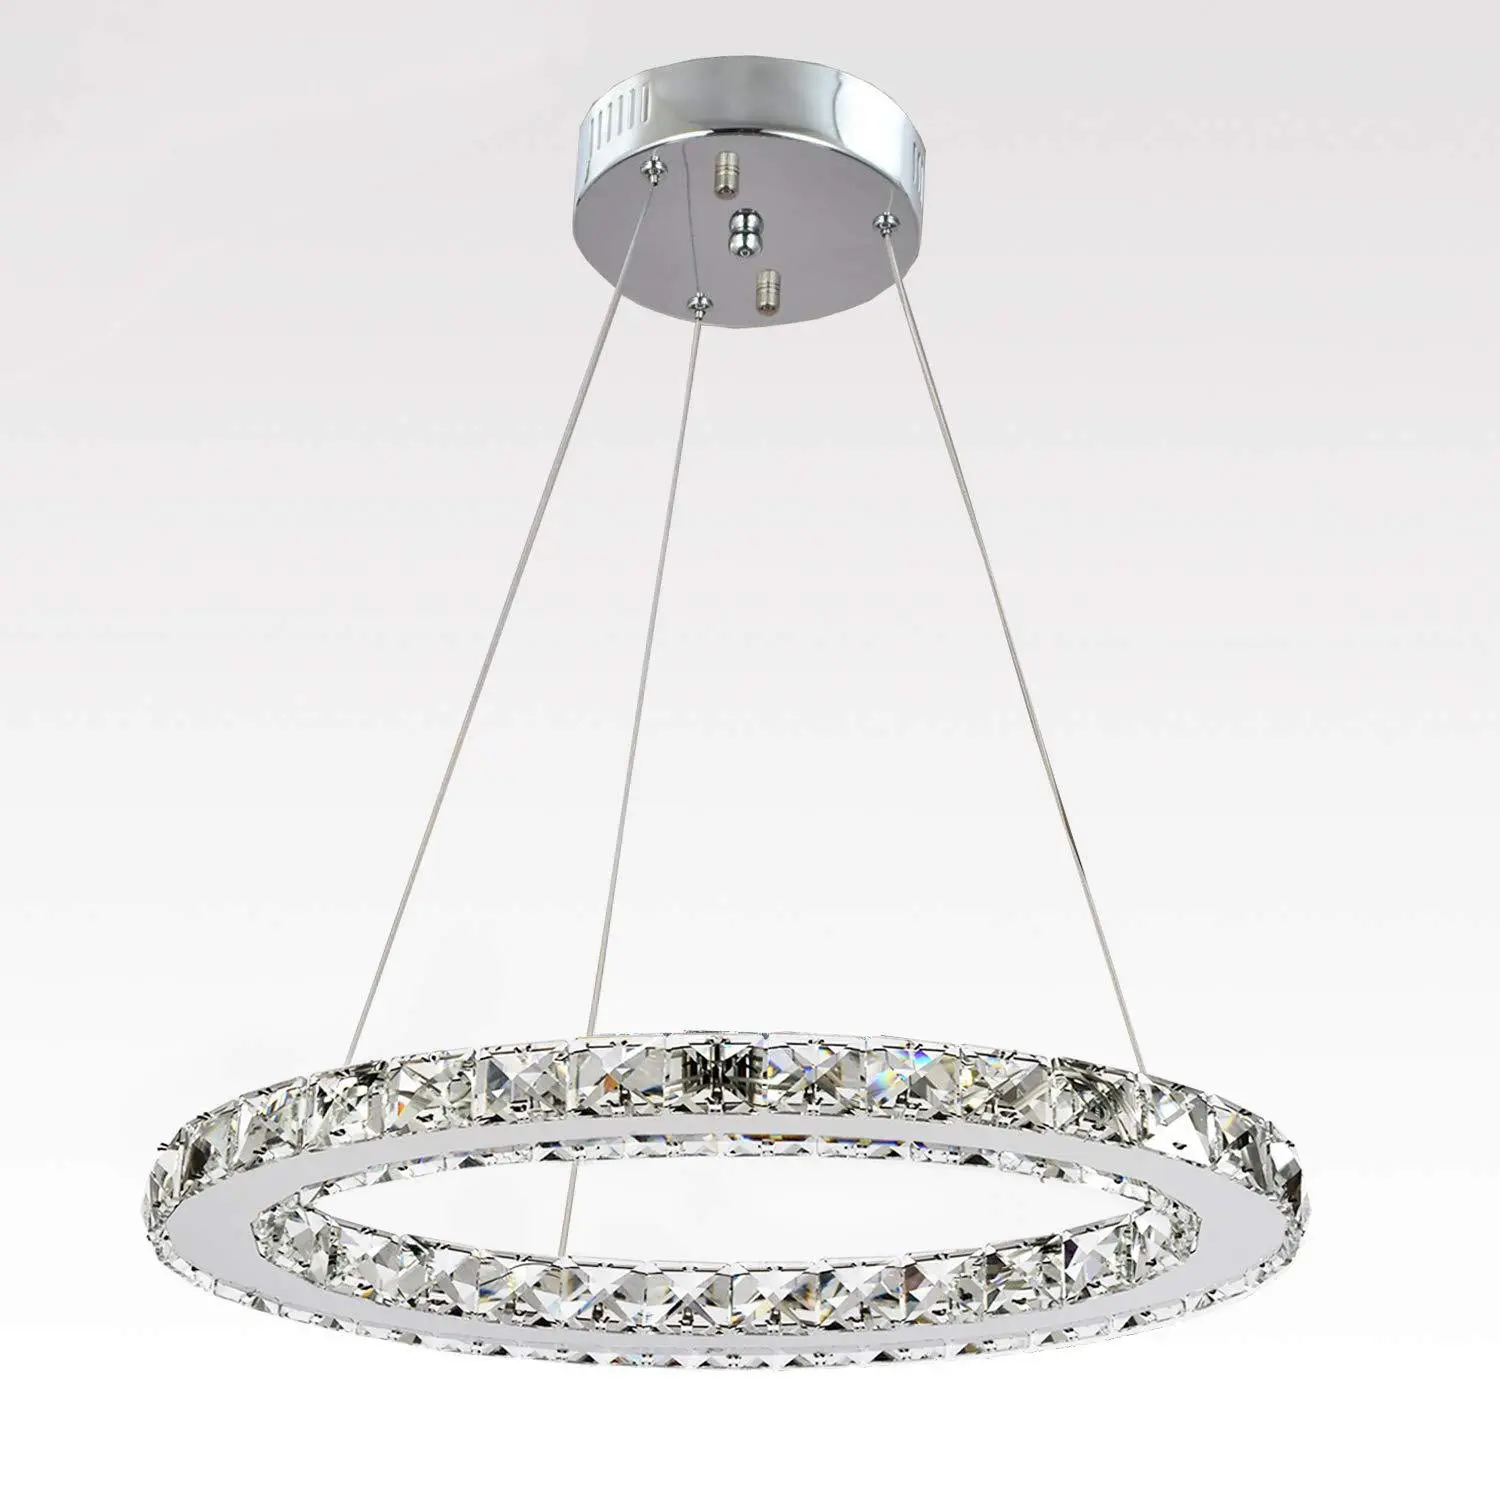 Bedroom pendant lamp with switcher on the body postmodern minimalist light crystal chandeliers